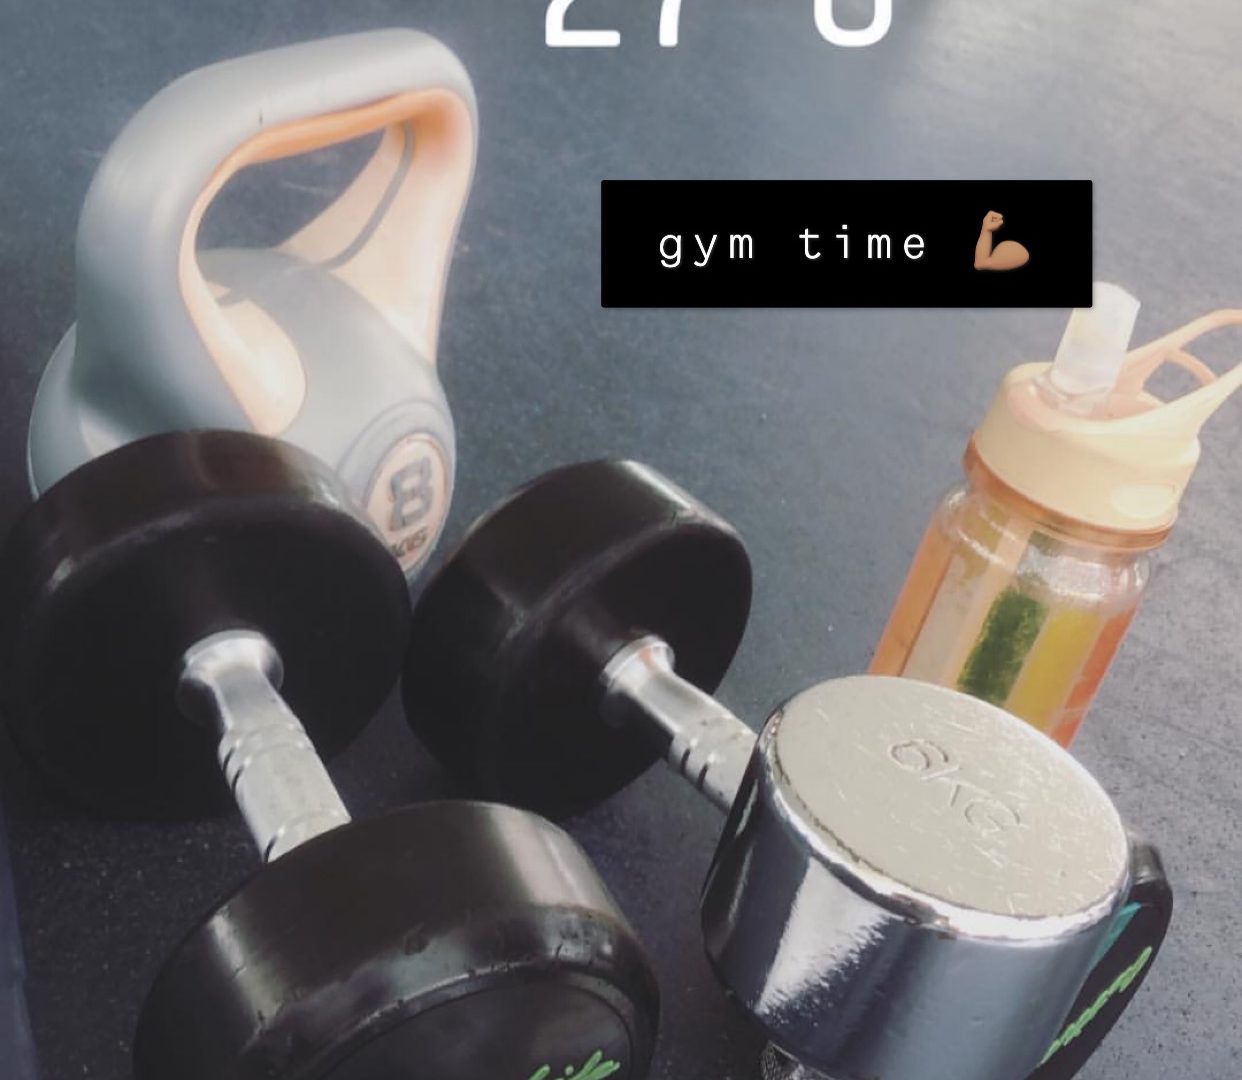 A couple of dumbells and a water bottle set on the floor. There's a water stamp that reads 27 degrees celcius. There's also text with a black background that reads "gym time".